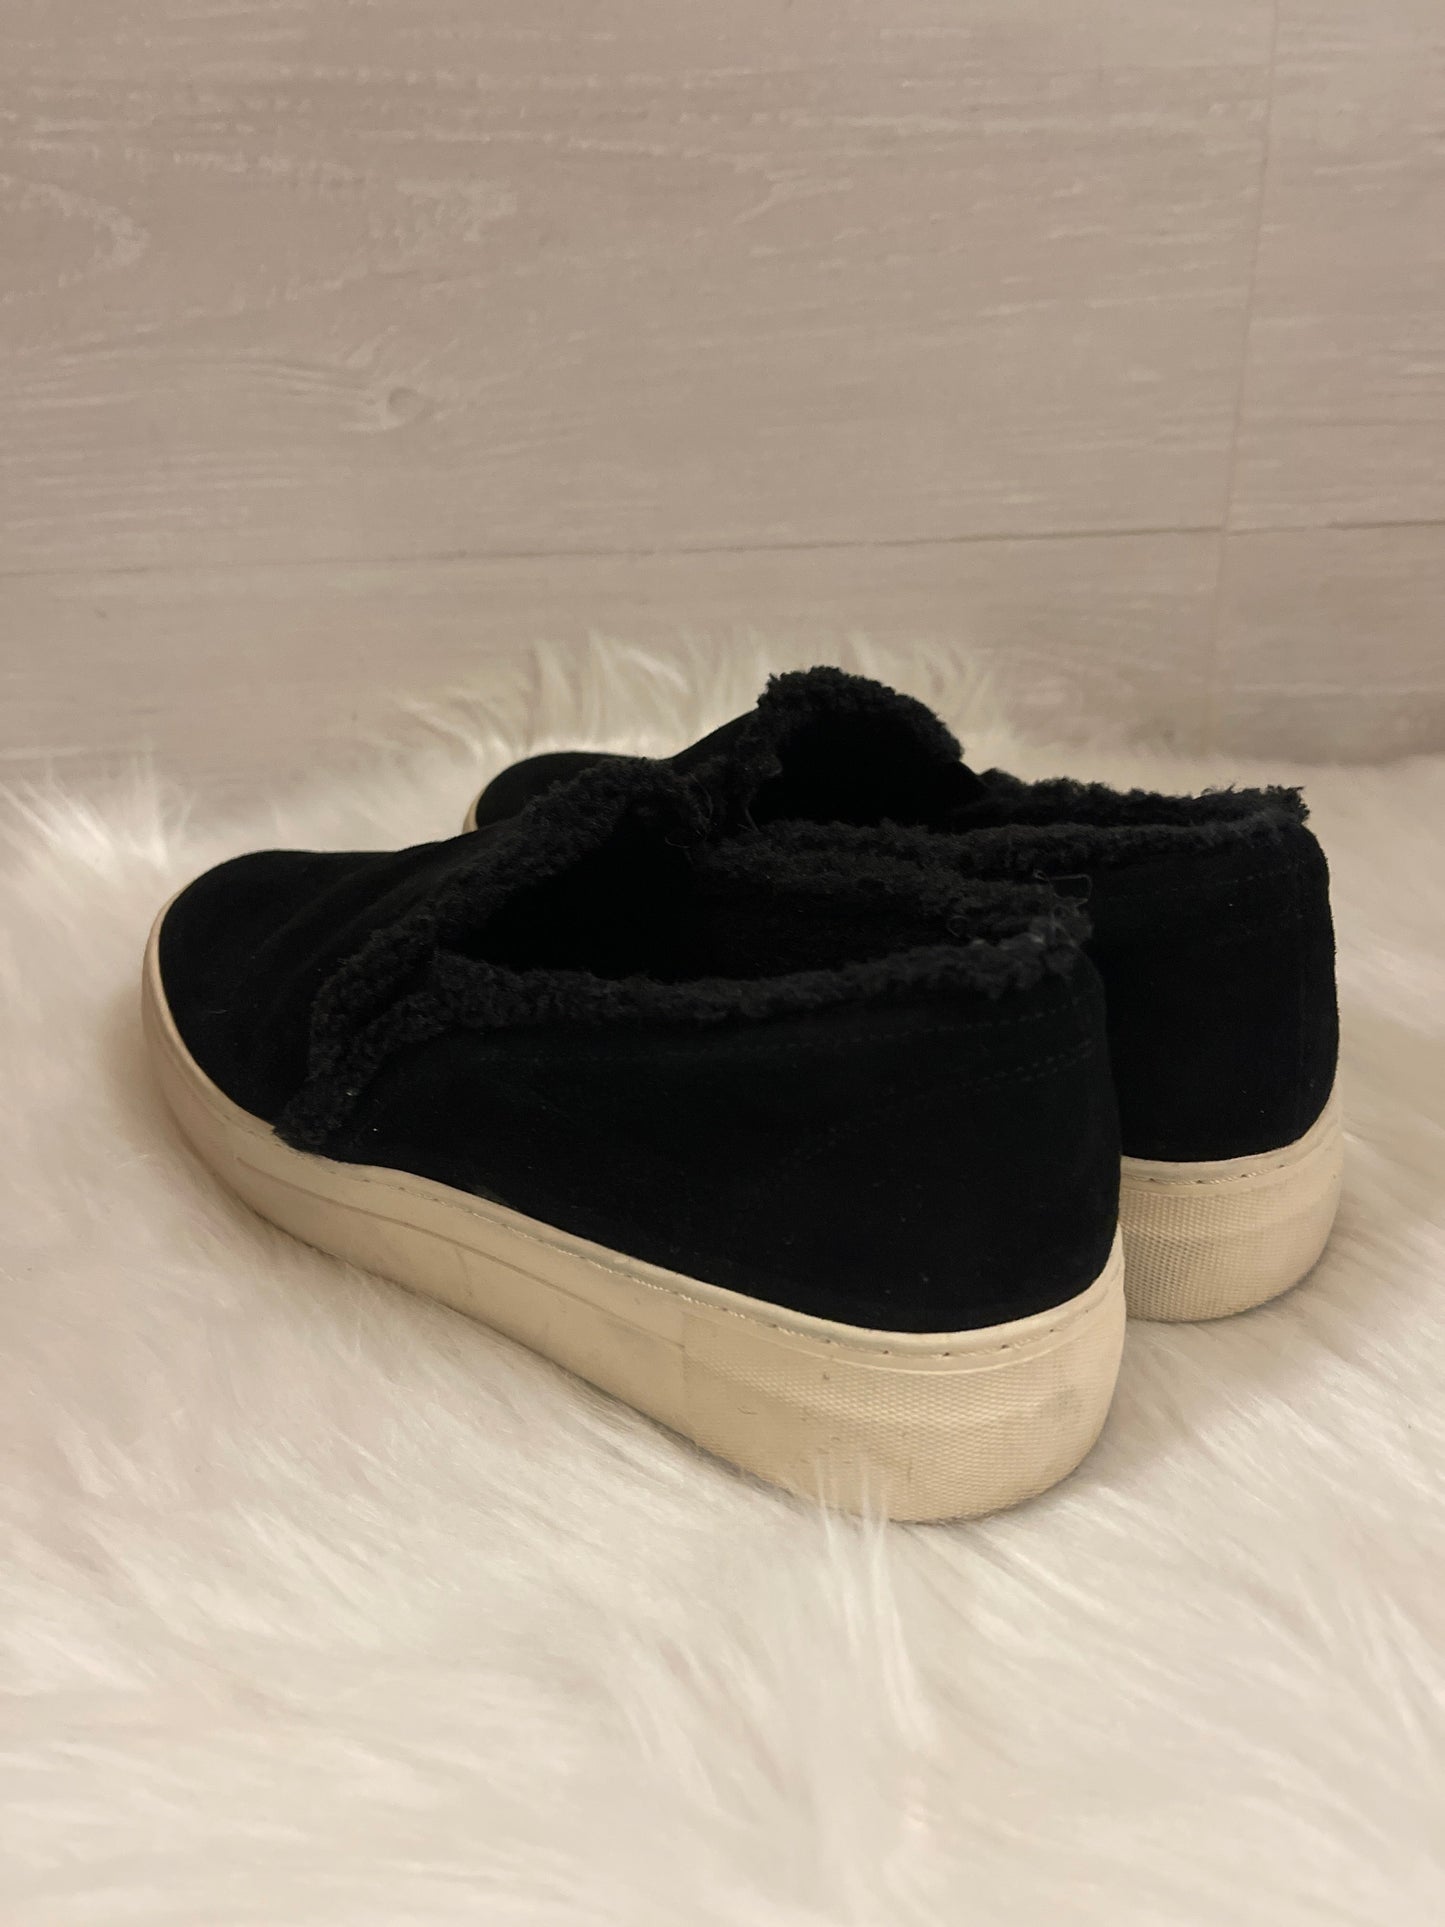 Shoes Sneakers By Vince Camuto  Size: 6.5